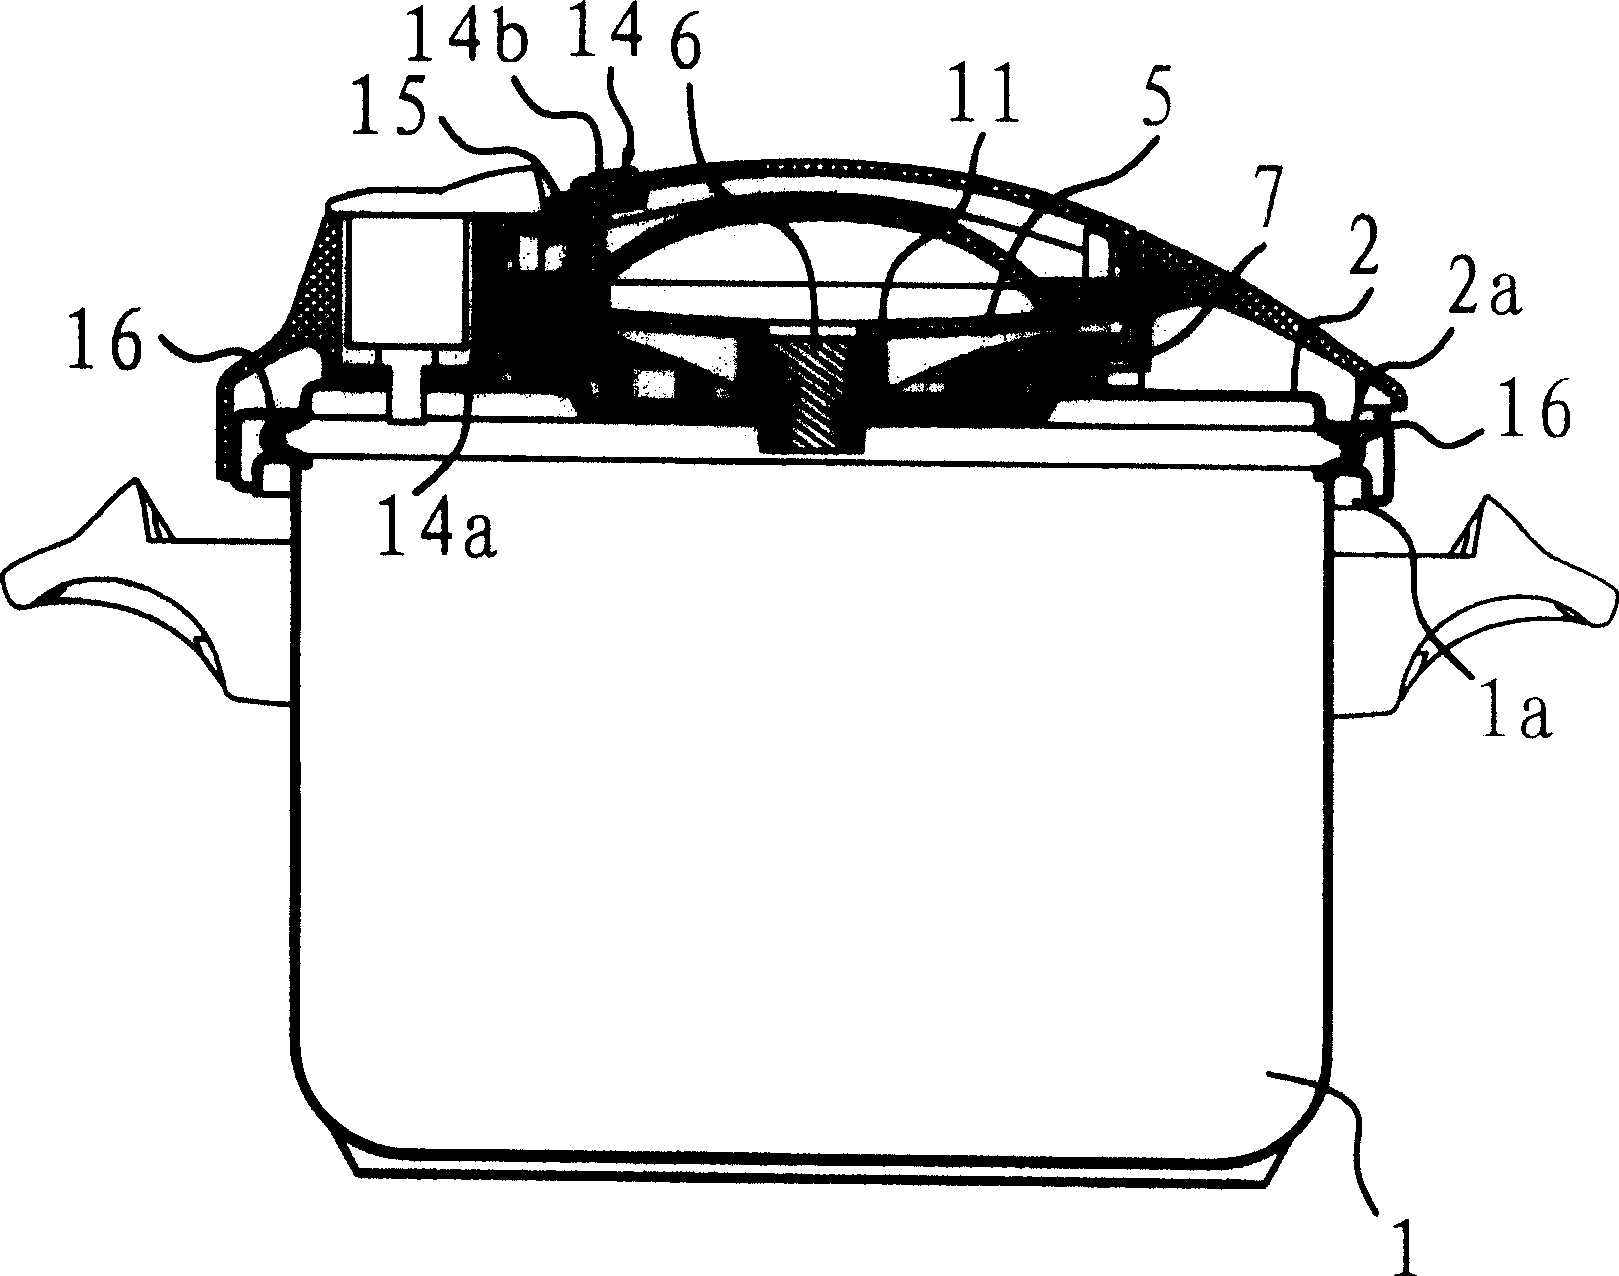 Open and close cover structure of a pressure cooker